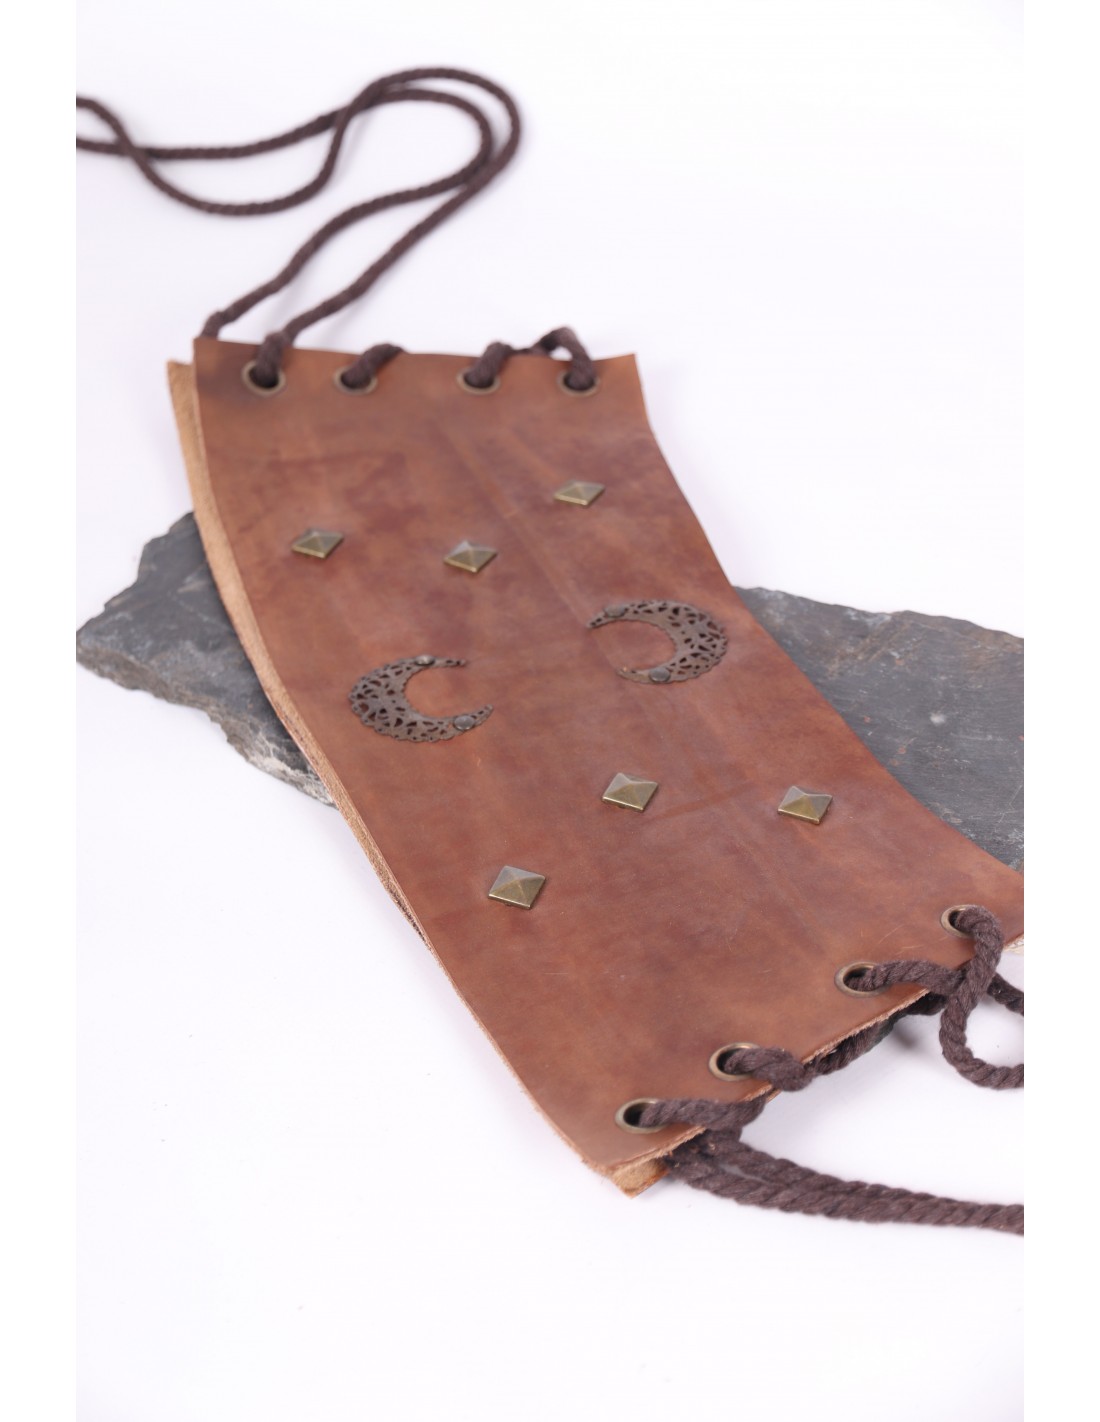 Medieval brown leather corset with studs